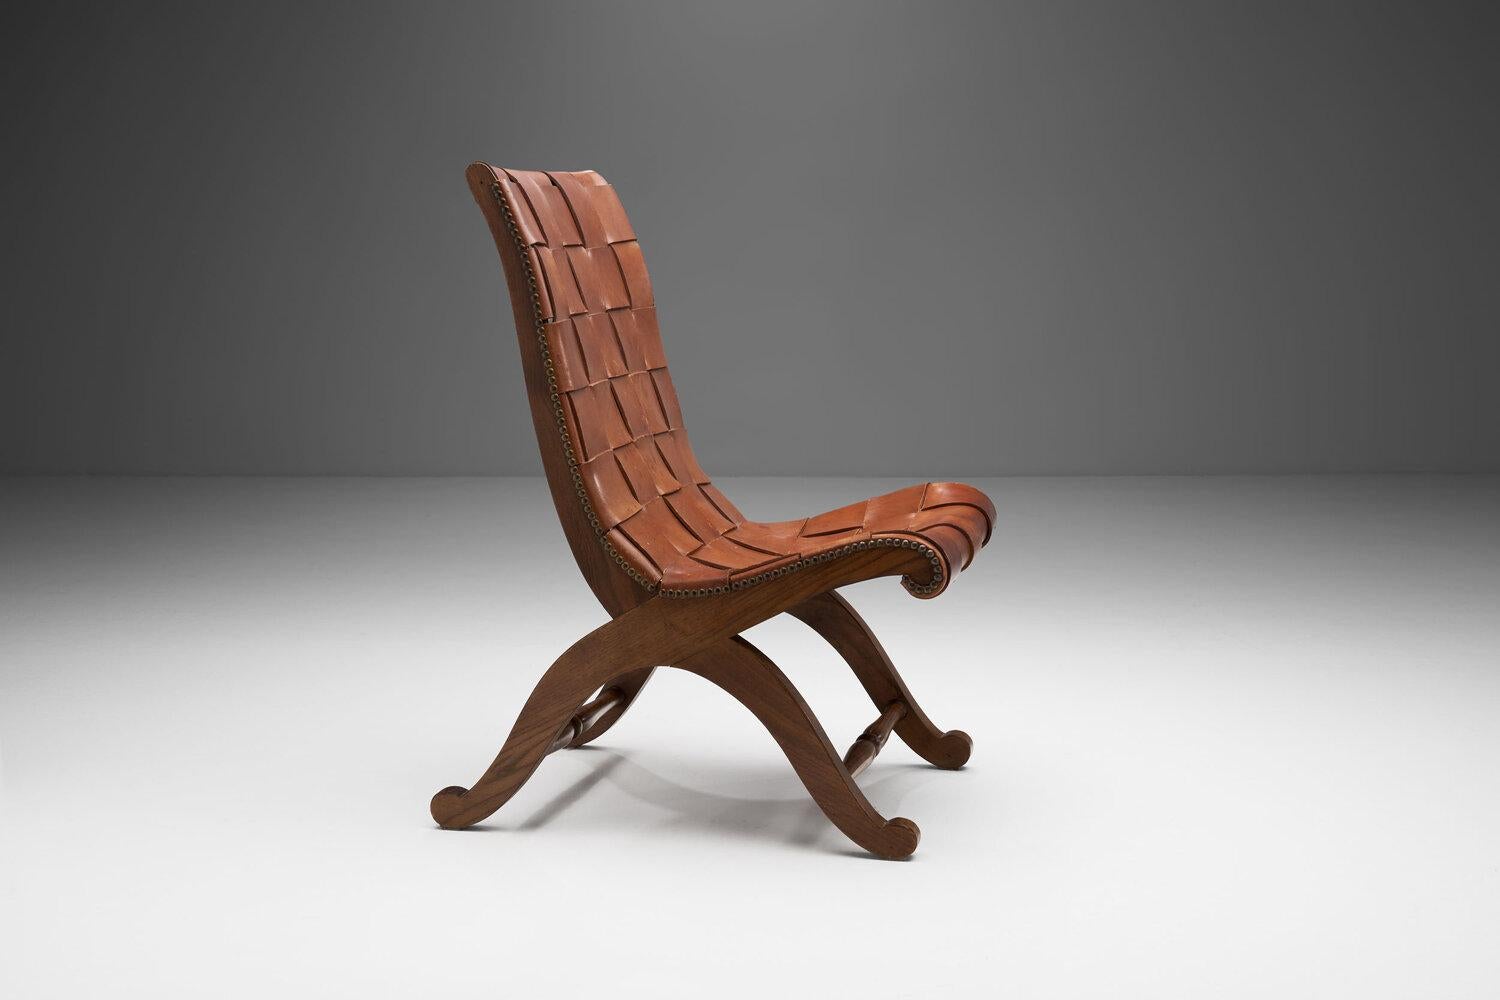 Woven Mid-Century Spanish Valenti Leather Chair by Pierre Lottier, Spain, 1950s